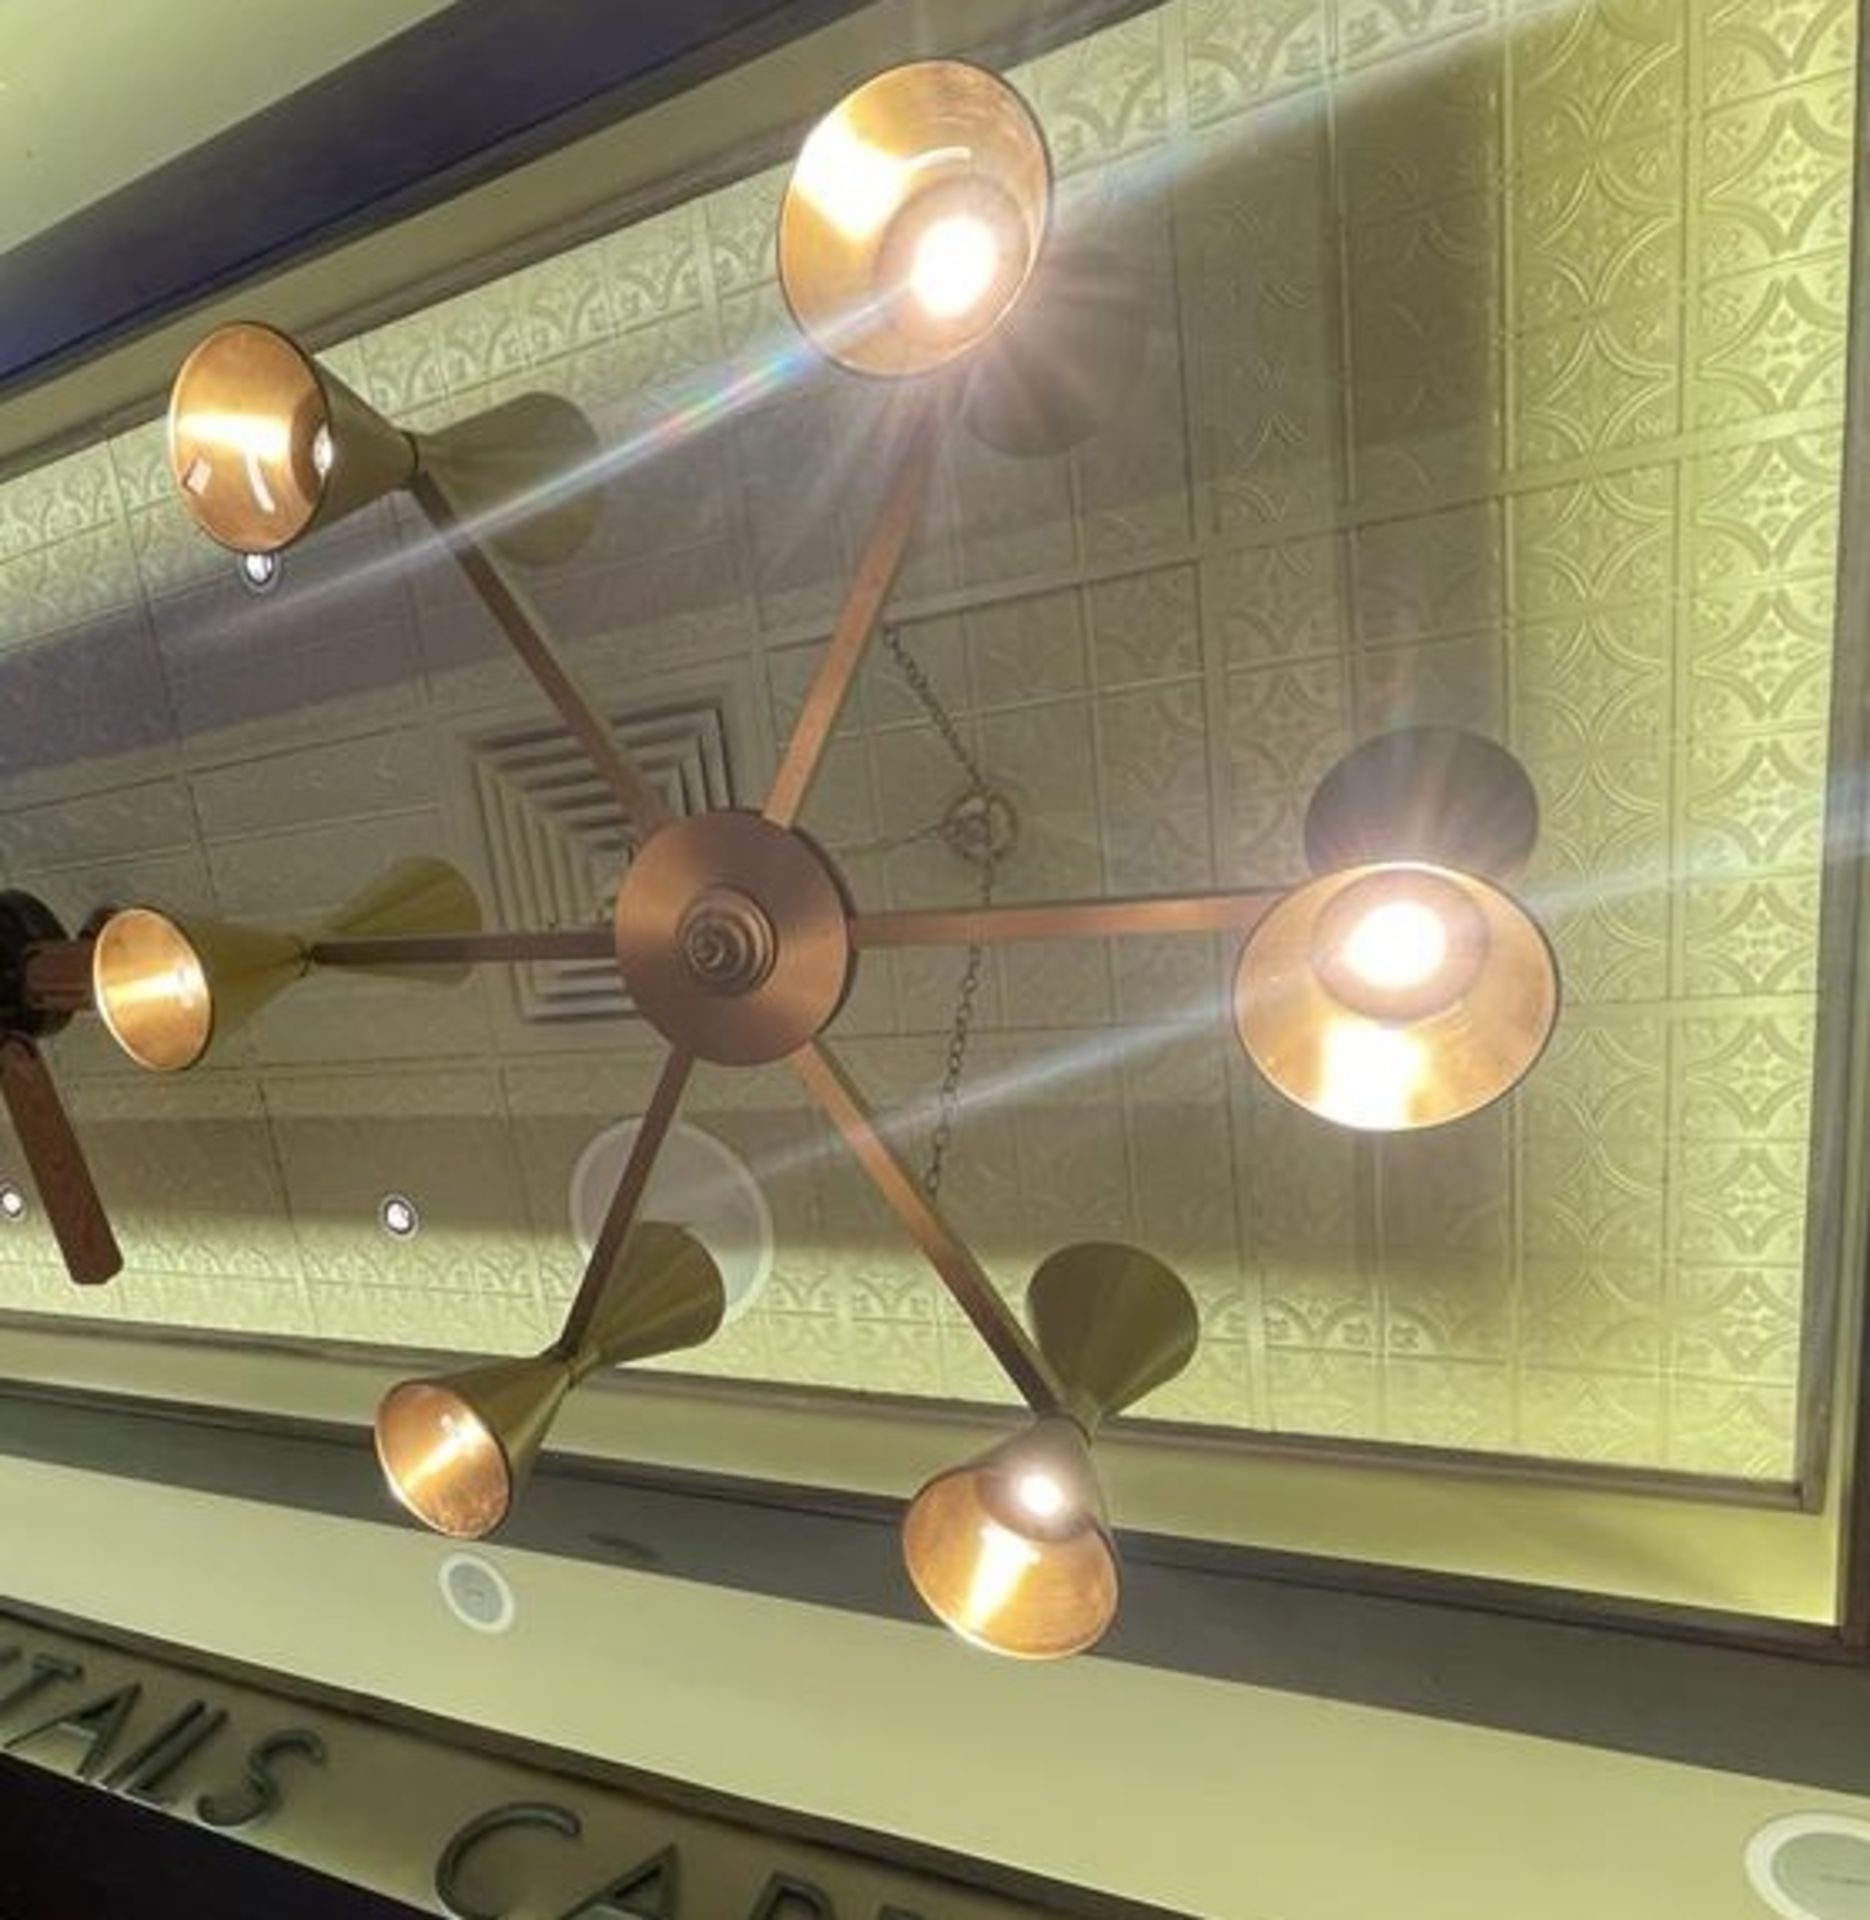 1 x Commercial 6-Arm Ø1-Metre Chandelier Ceiling Light - From a Popular American Diner - CL809 WH2 - - Image 2 of 2